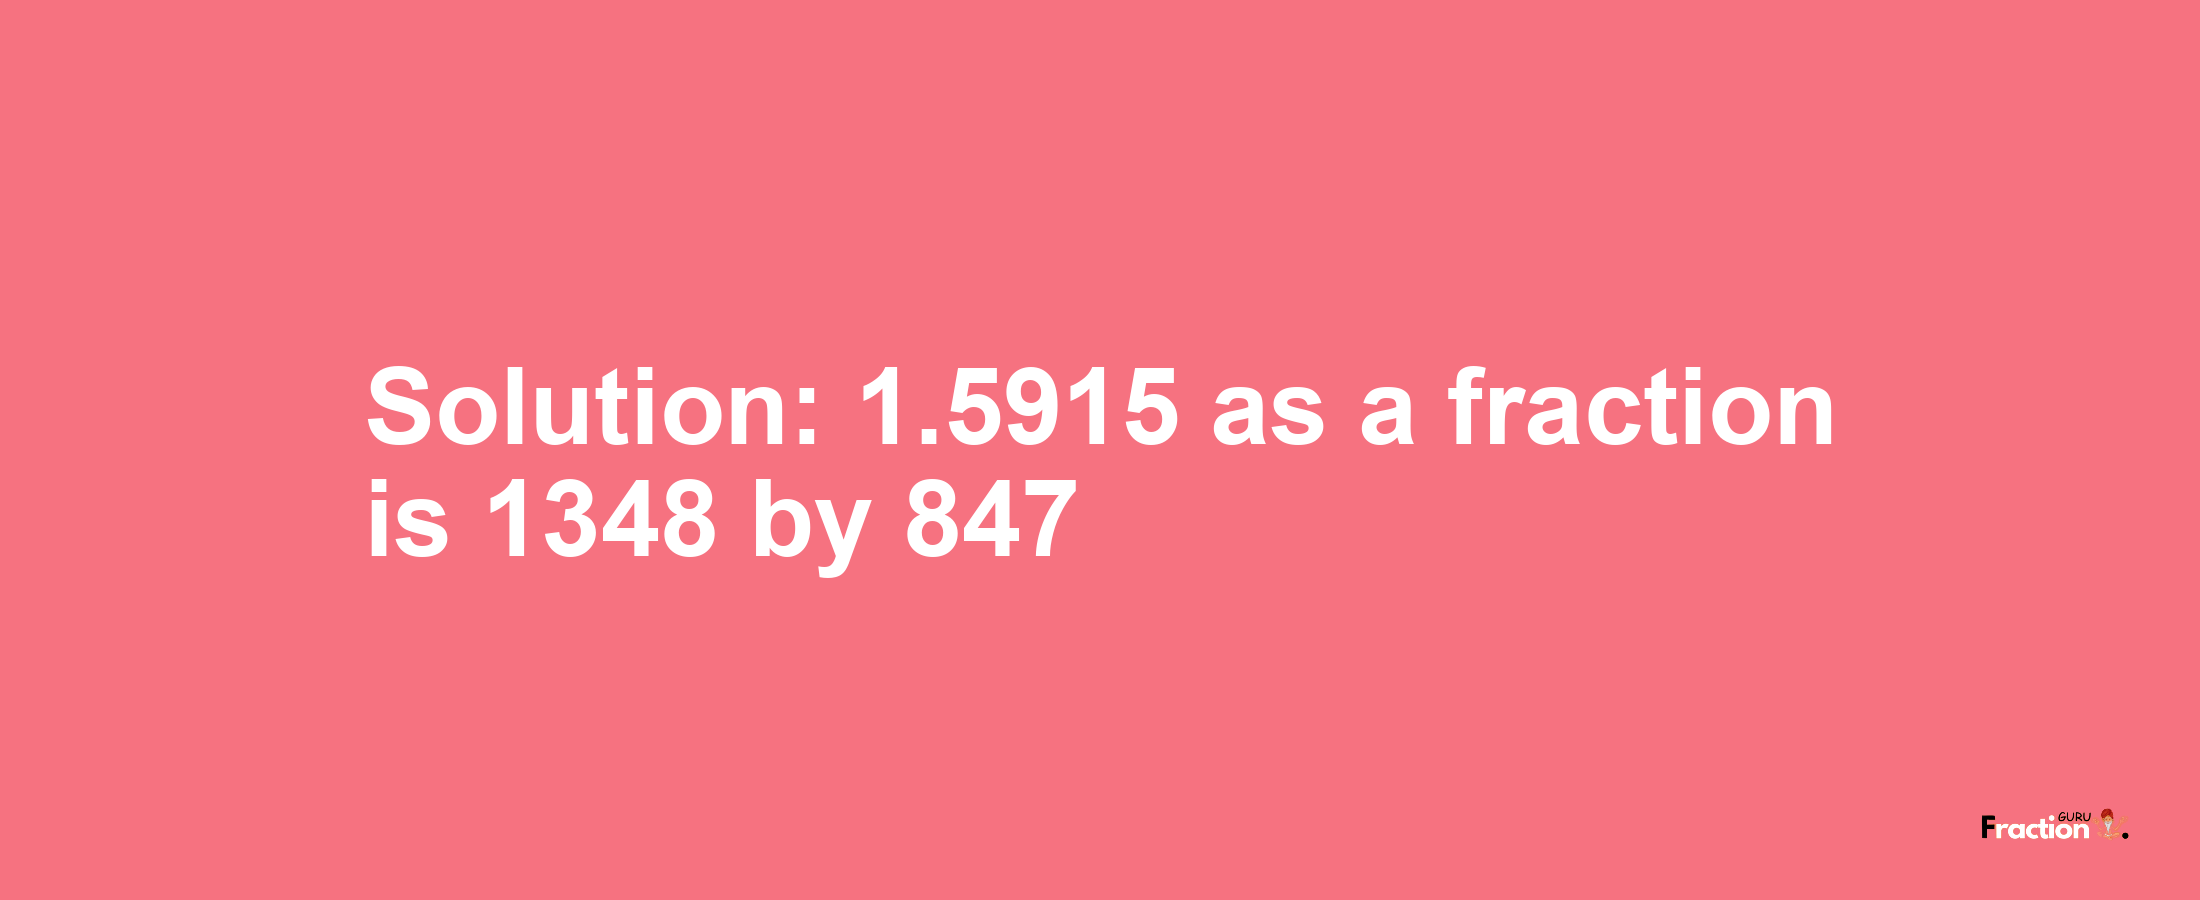 Solution:1.5915 as a fraction is 1348/847